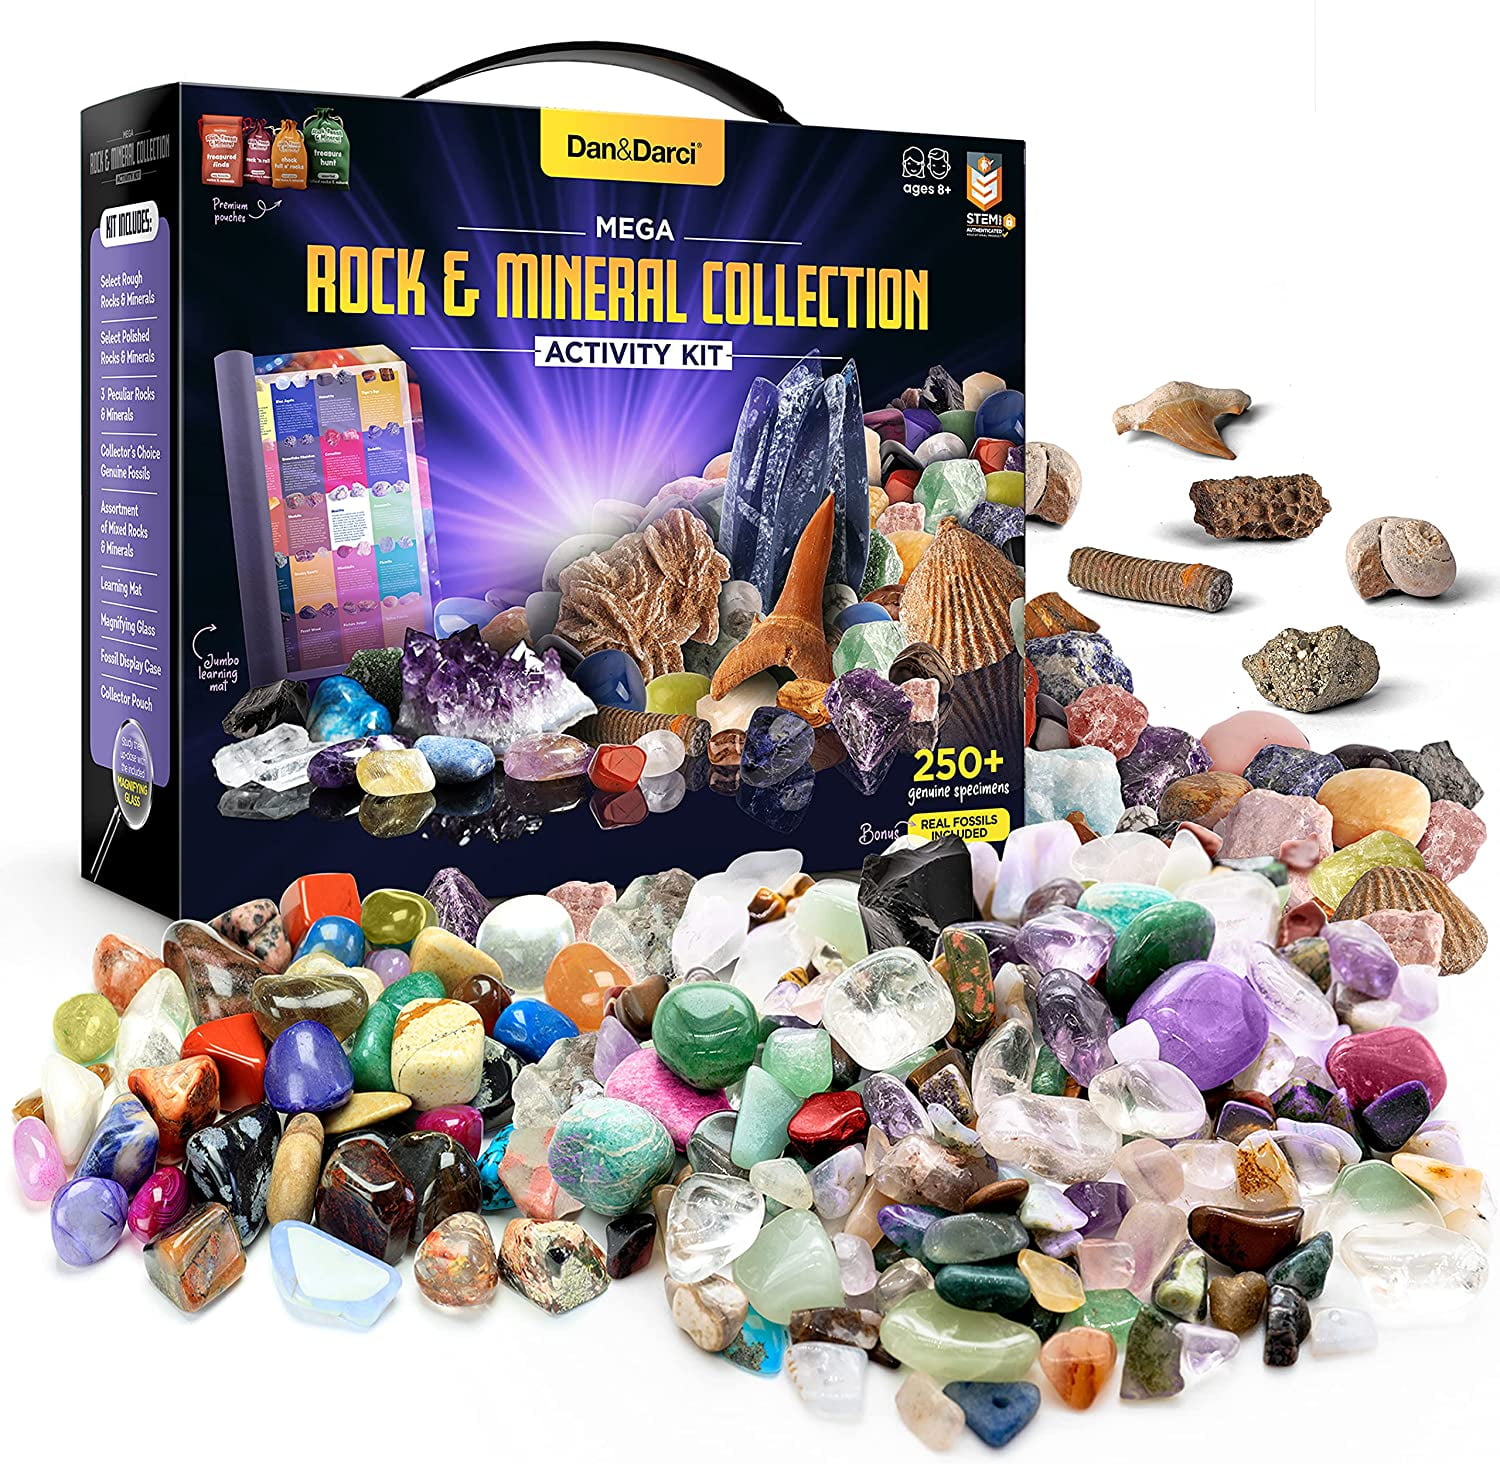 rock and mineral set 14 pieces stone collection rock collection Black and white rock set